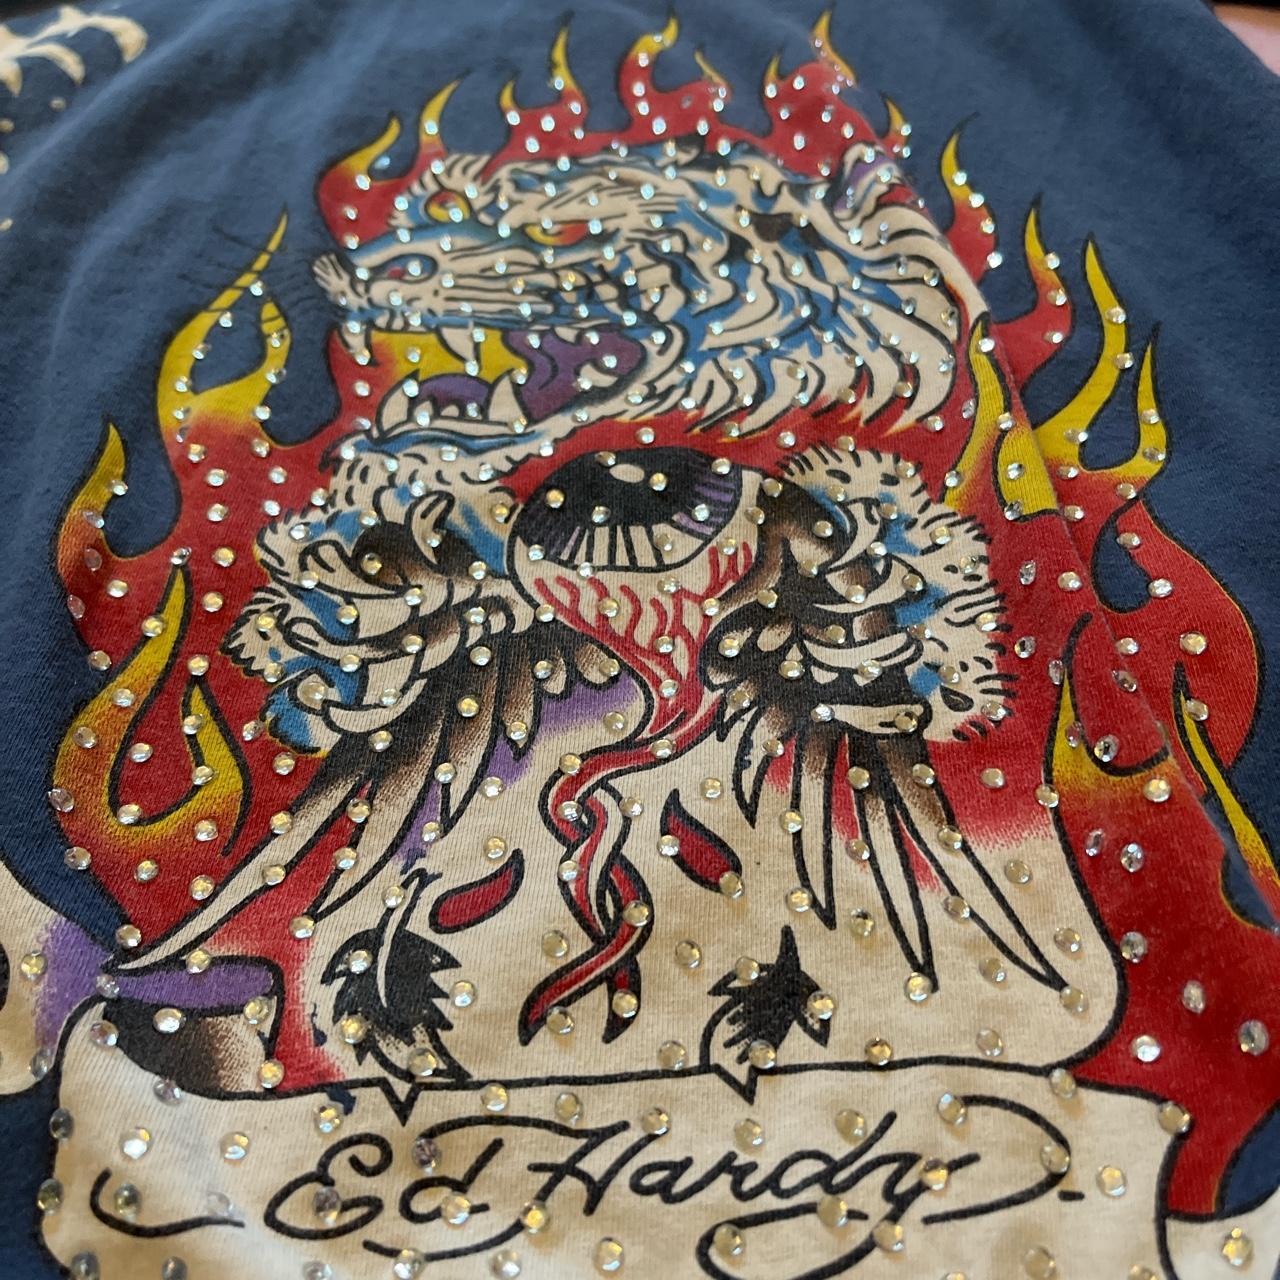 Ed Hardy Men's Blue and Red T-shirt | Depop